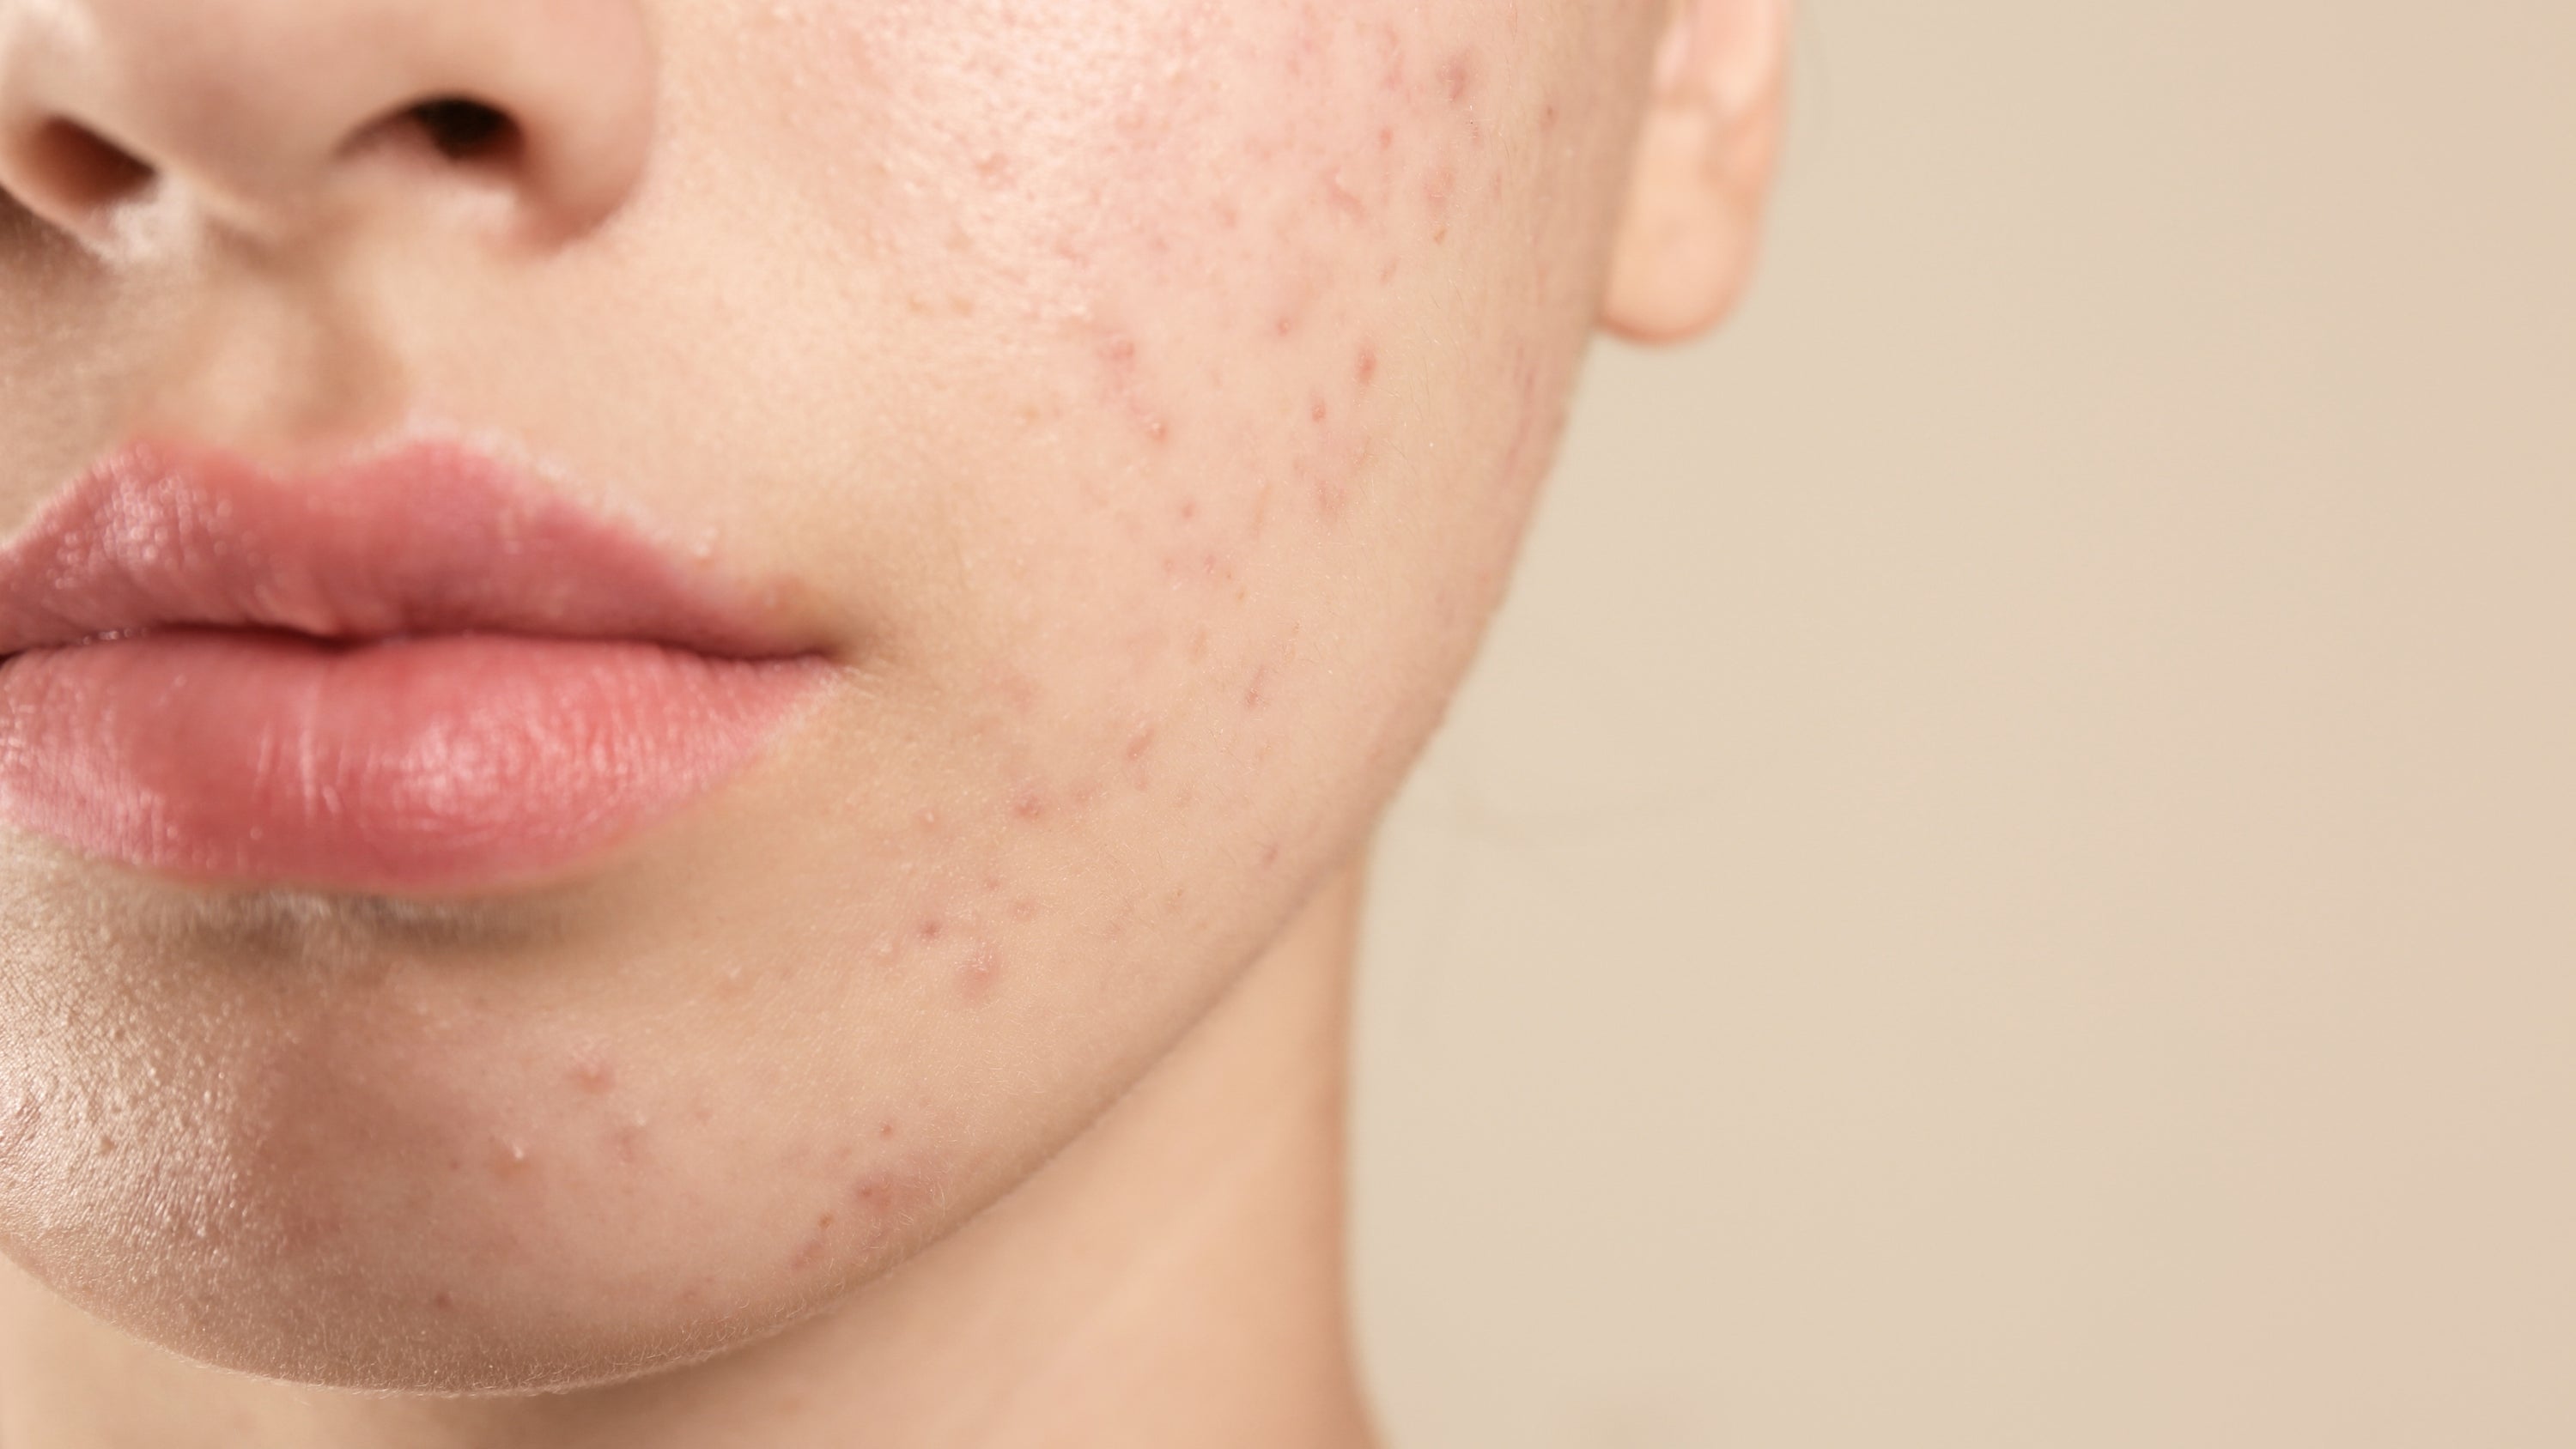 What Acne Treatment is Best for Sensitive Skin?